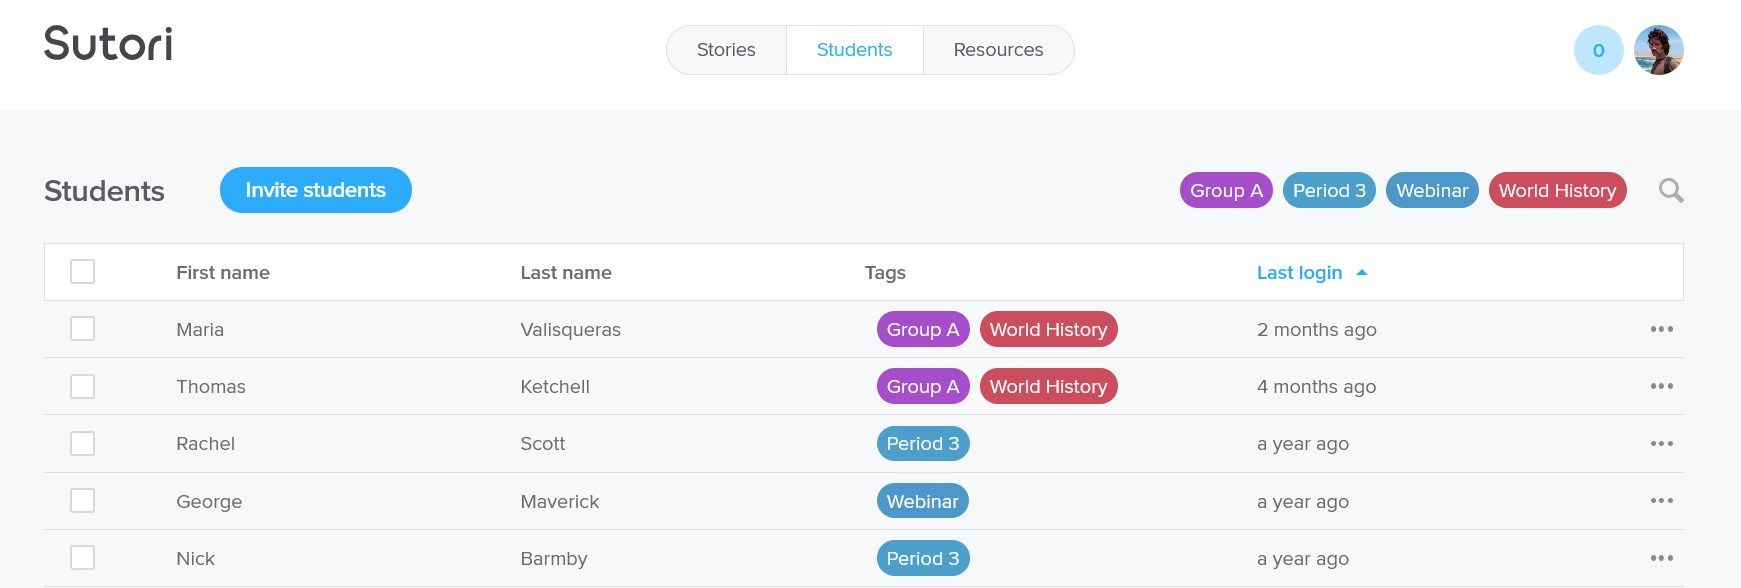 Manage and organize students into groups and classes. View their work, check out the learning analytics (active time on Sutori, how they answered quizzes) and provide feedback.